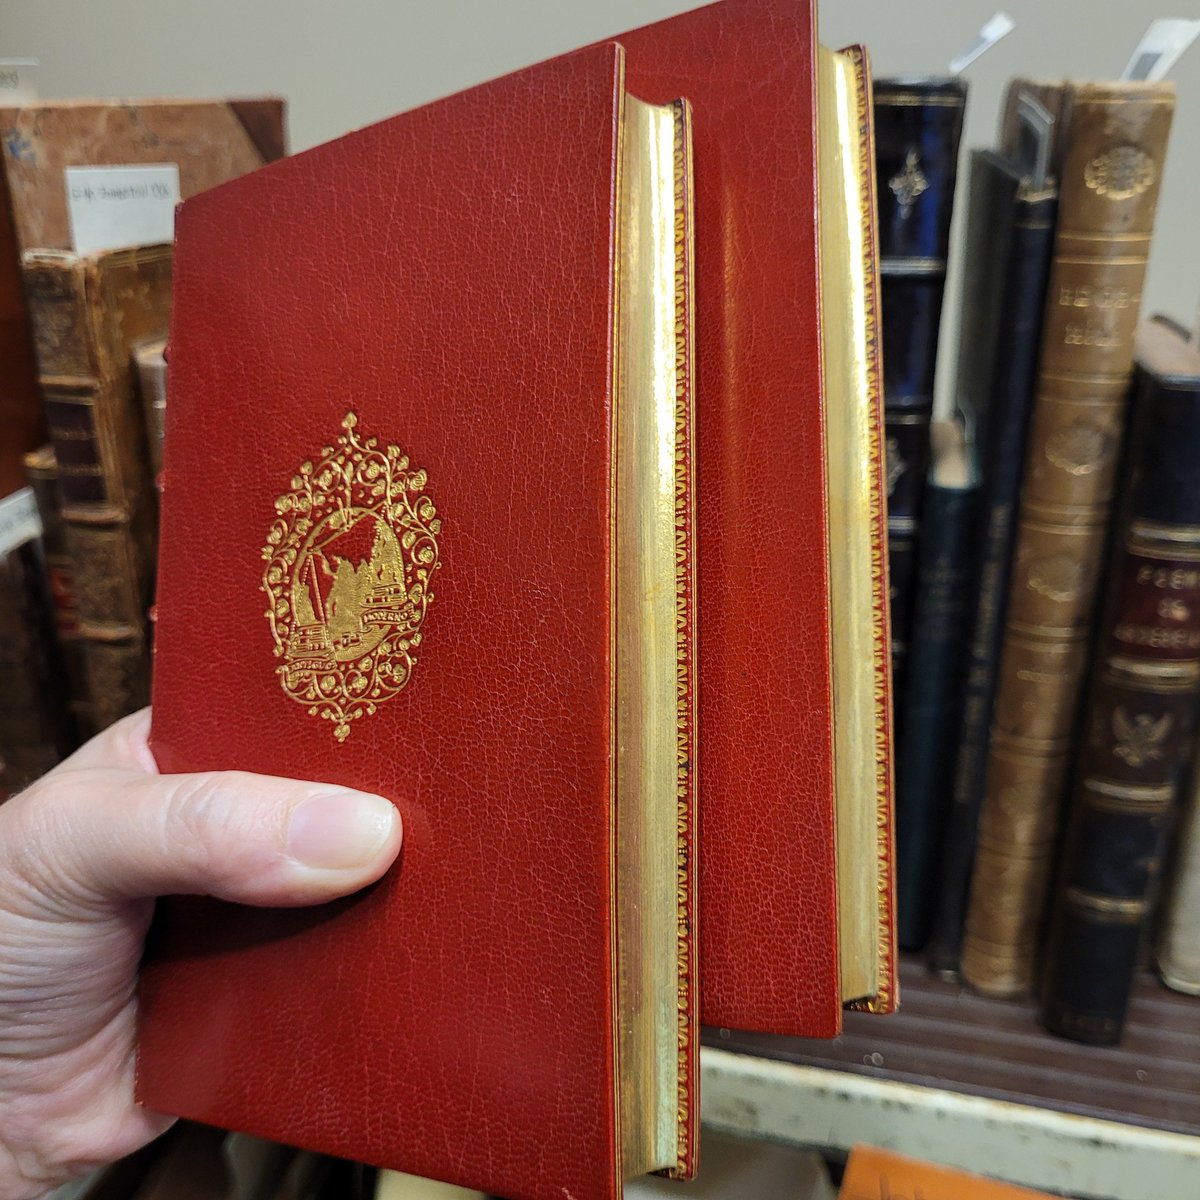 On the cataloging truck today is the 2 volume set 'Premier et second thome des histoires tragiques,' published in 1568. The 19th-century crimson morocco binding by Chambolle-Duru is stunning! The supra-libros of Isidoro Fernandez are embossed in gold on the covers. #16thCentury